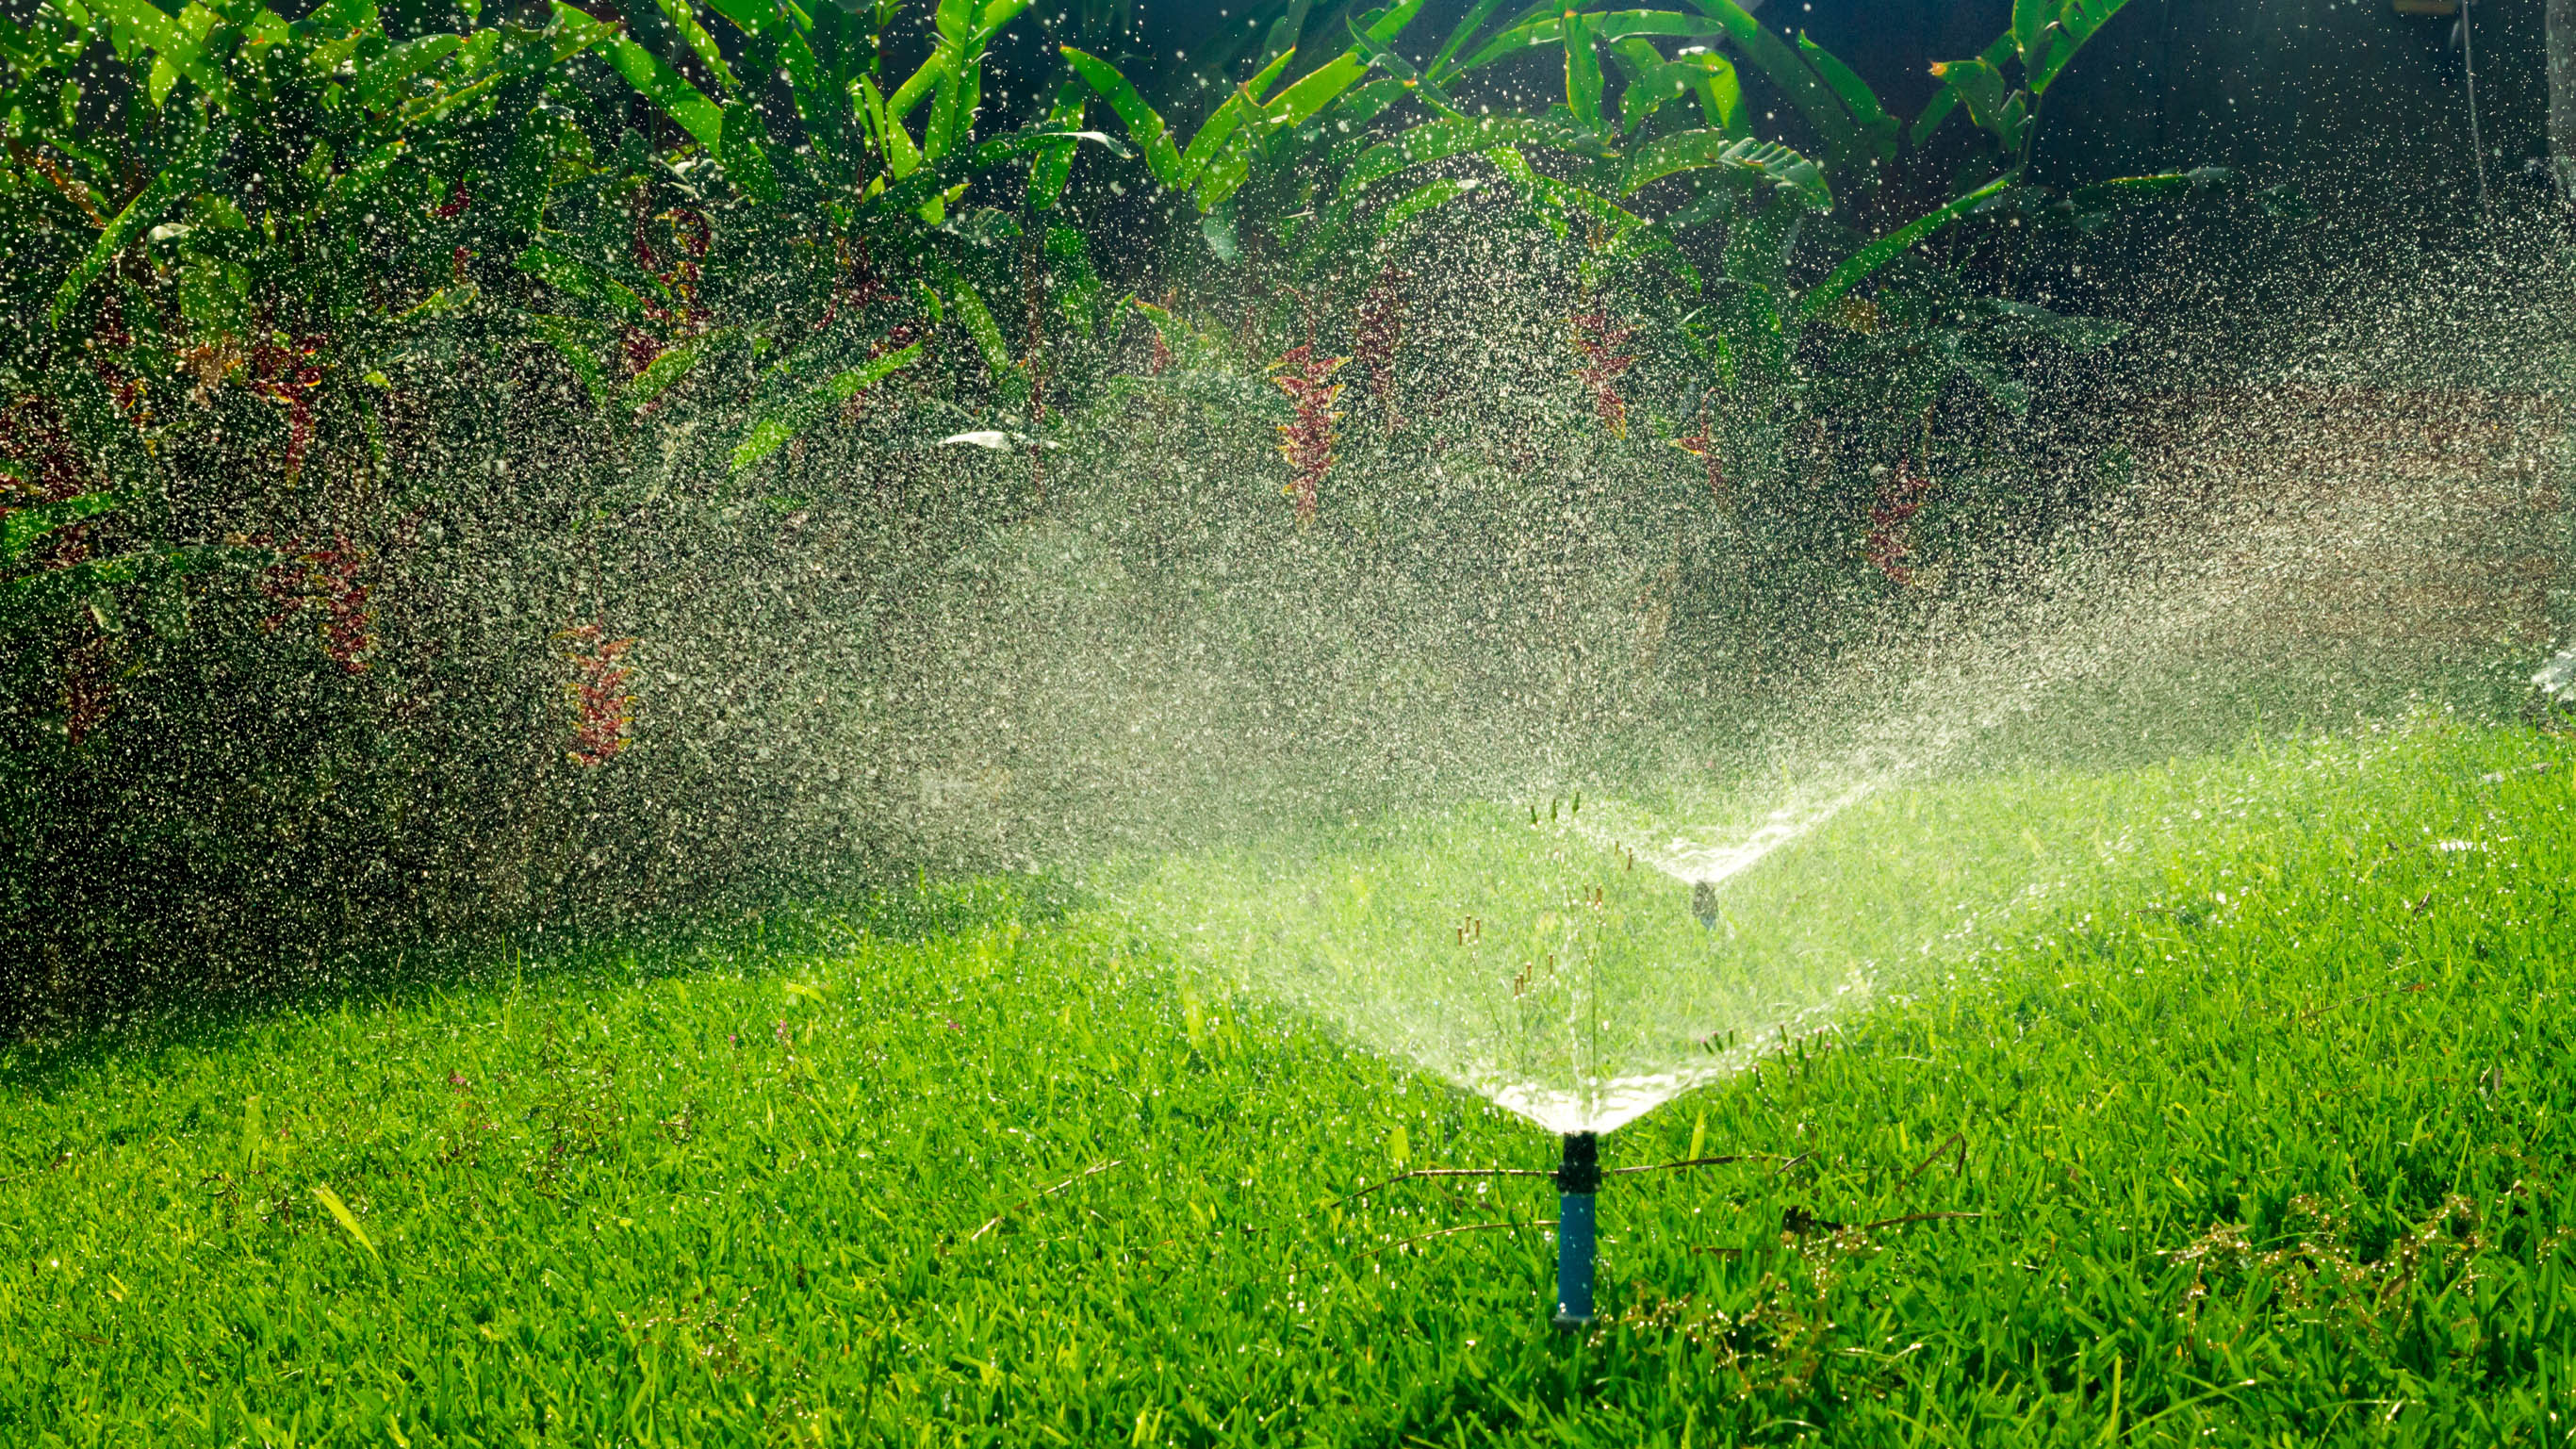 A lawn being watered by sprinklers at night